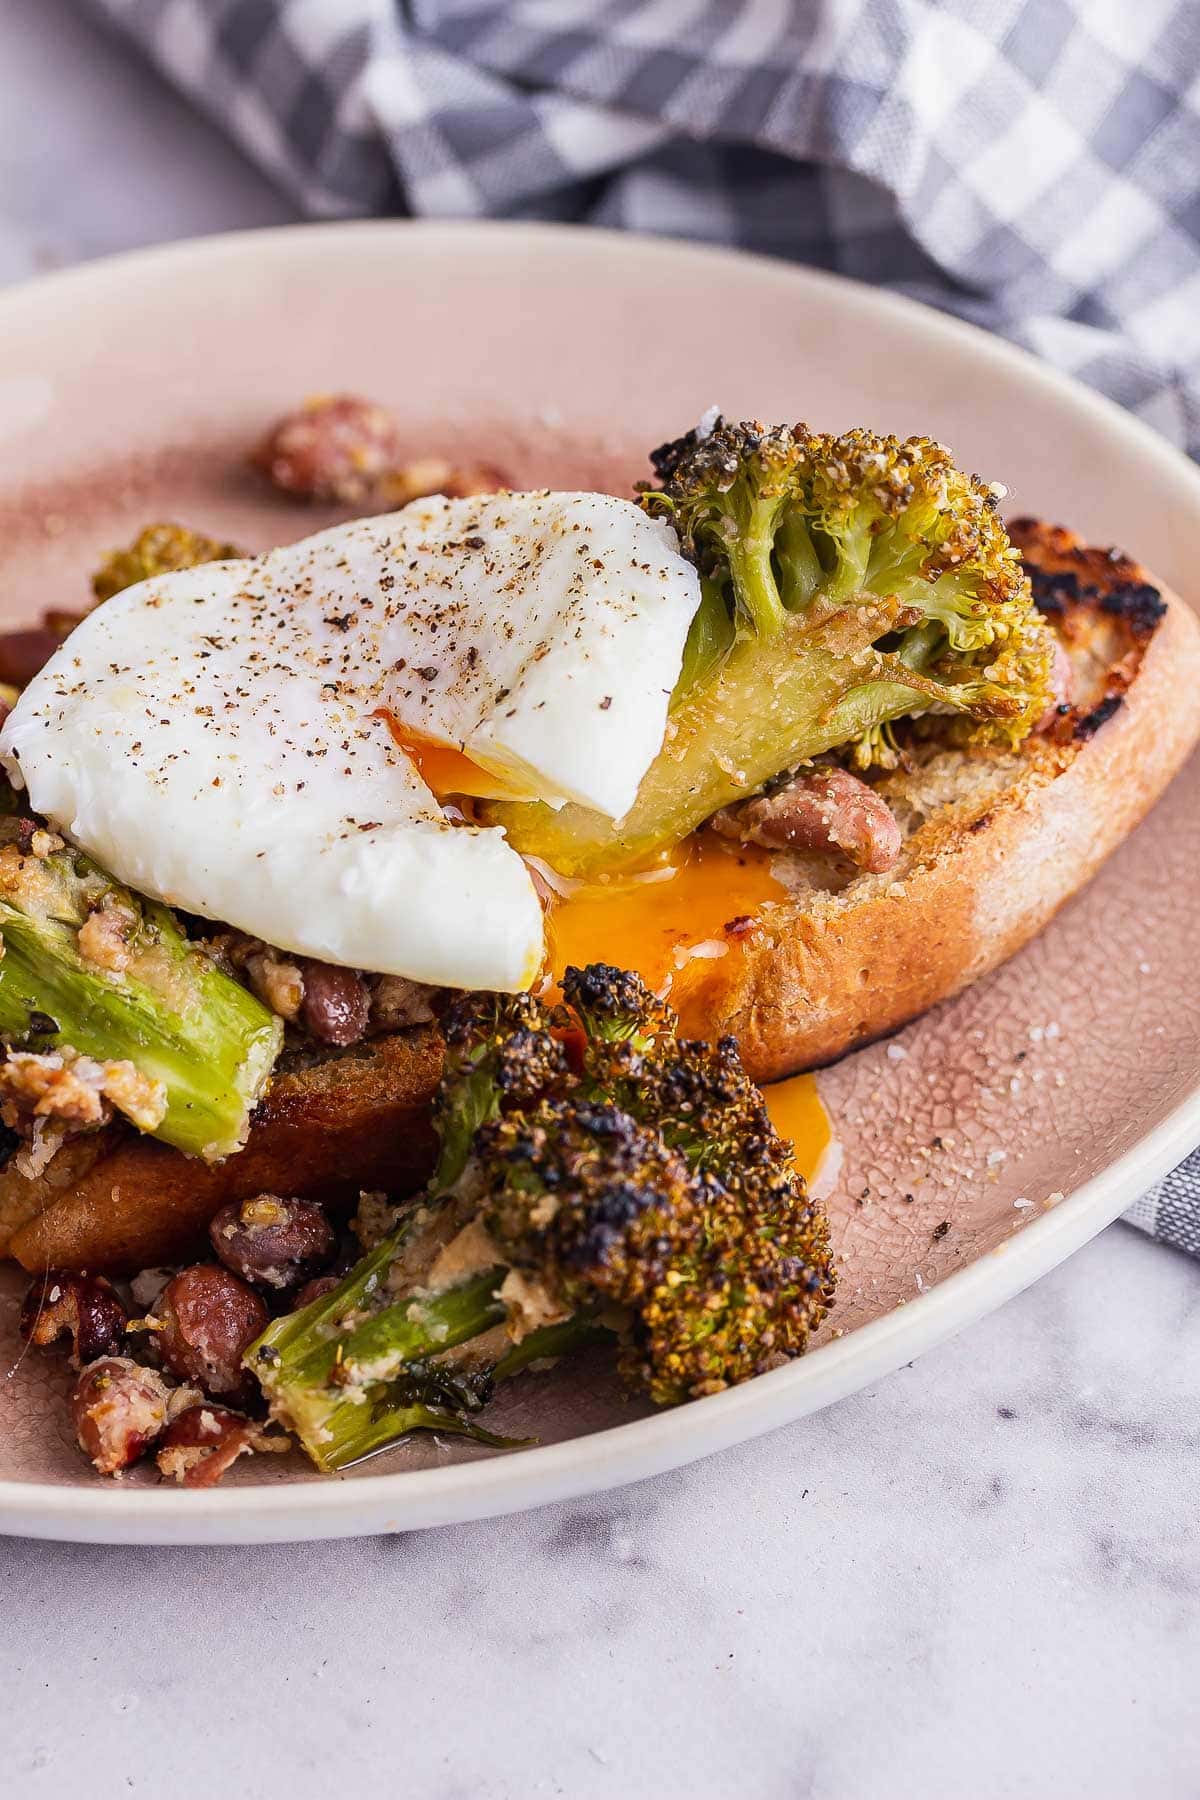 Roasted broccoli and beans on toast with a poached egg